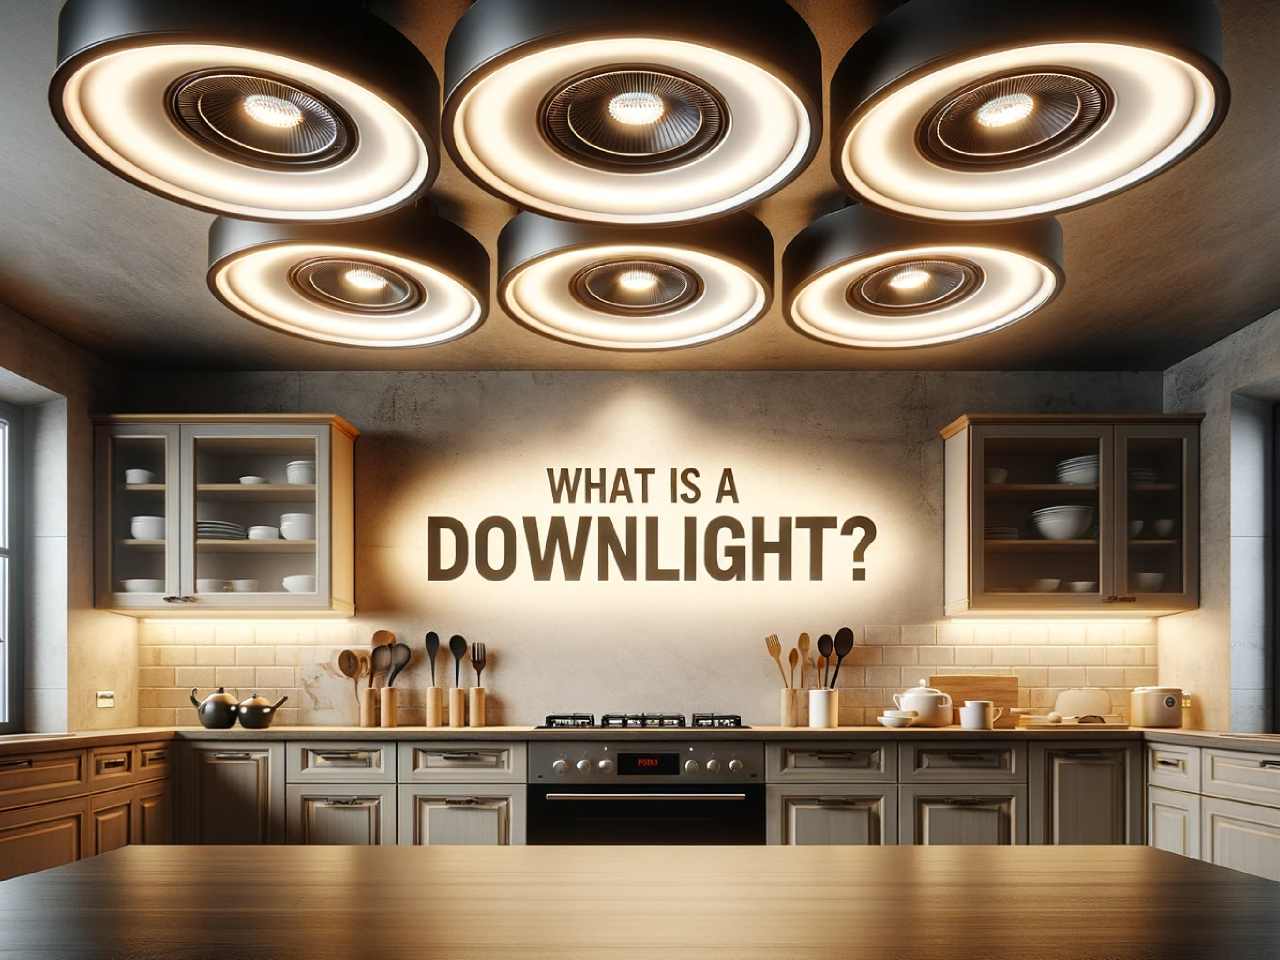 What is a Downlight